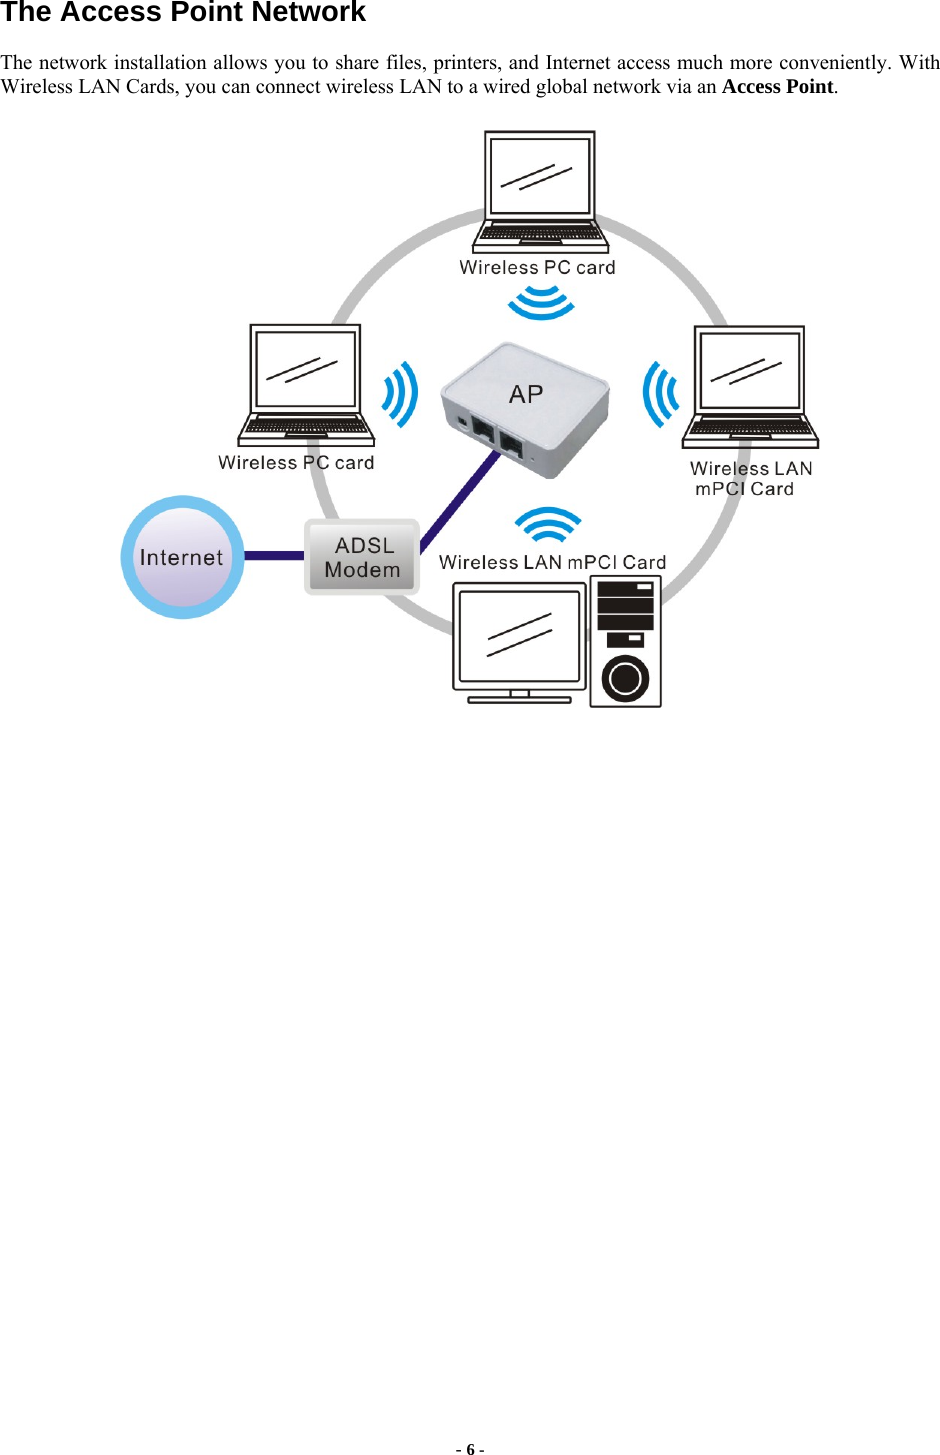 - 6 -  The Access Point Network The network installation allows you to share files, printers, and Internet access much more conveniently. With Wireless LAN Cards, you can connect wireless LAN to a wired global network via an Access Point.               